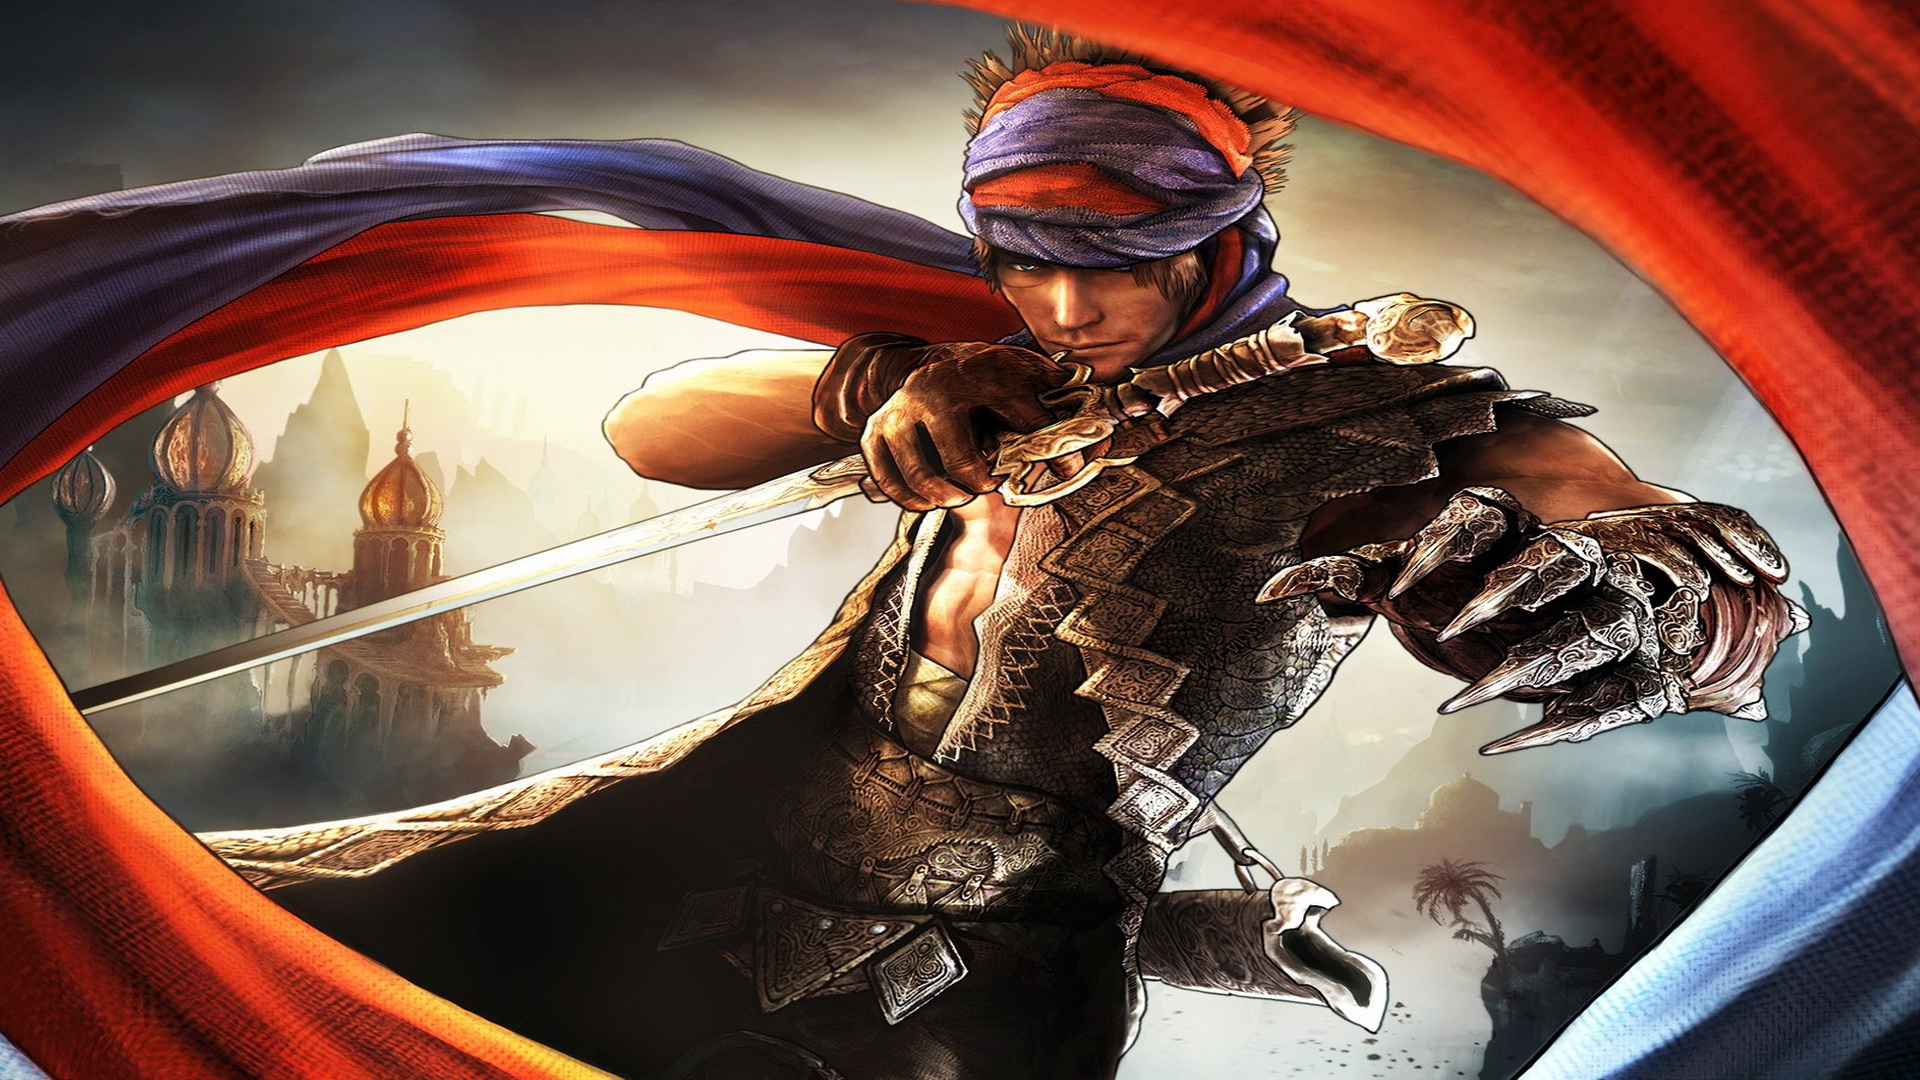 Wallpaper Game HD Background Prince Of Persia